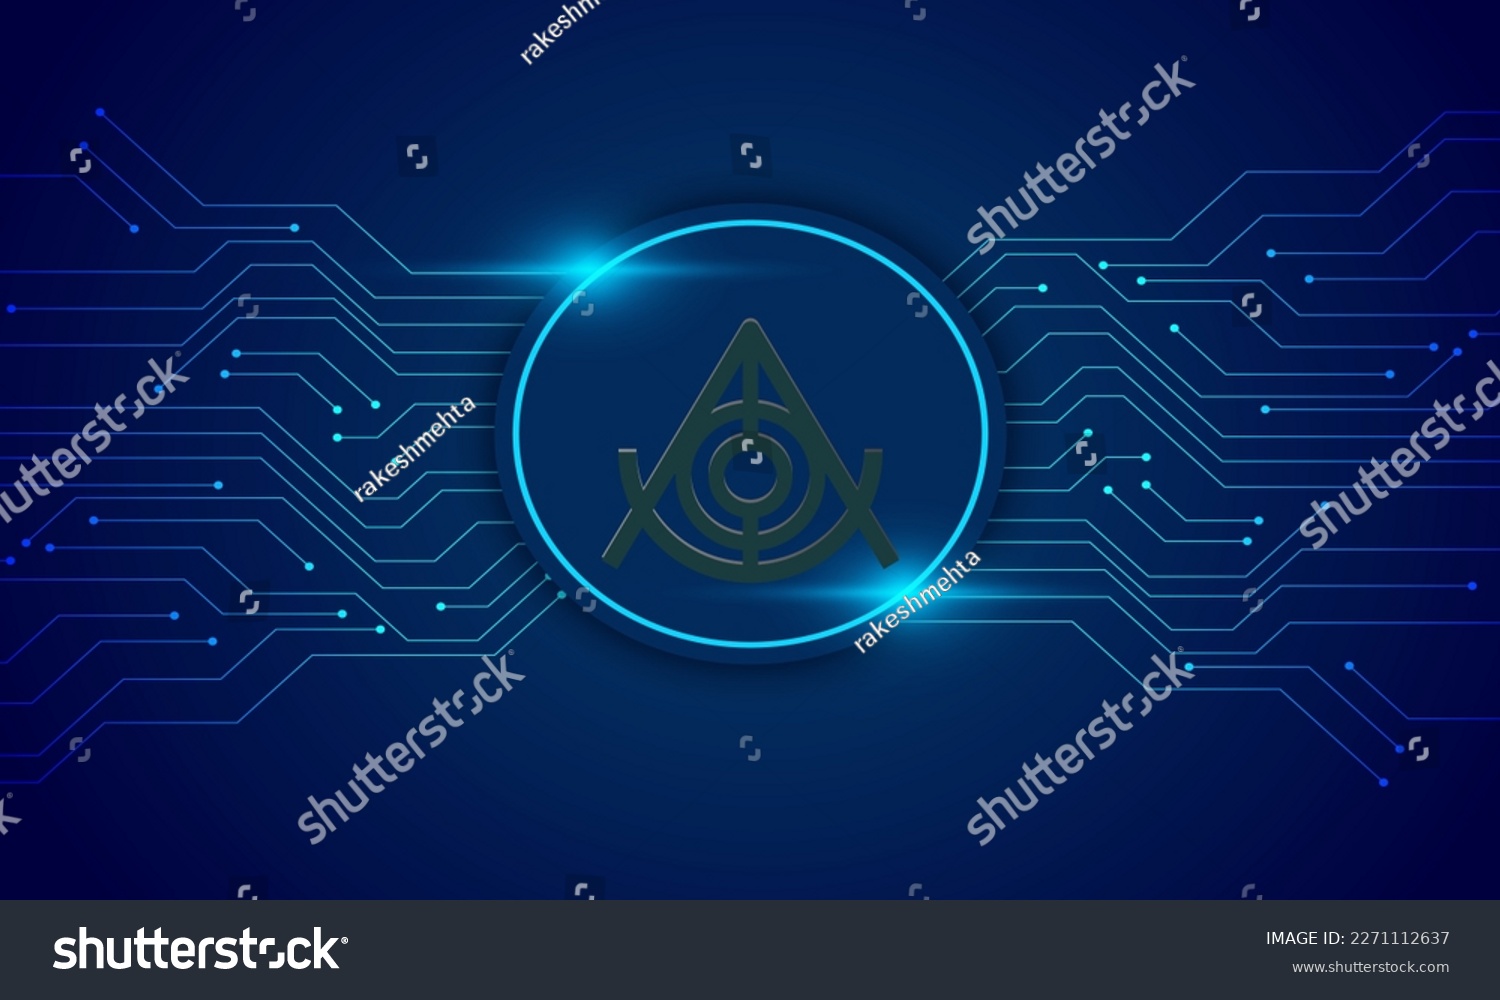 SVG of Aluna.social ALN token  logo with crypto currency themed circle background design.Aluna.social ALN currency vector illustration blockchain technology concept  svg